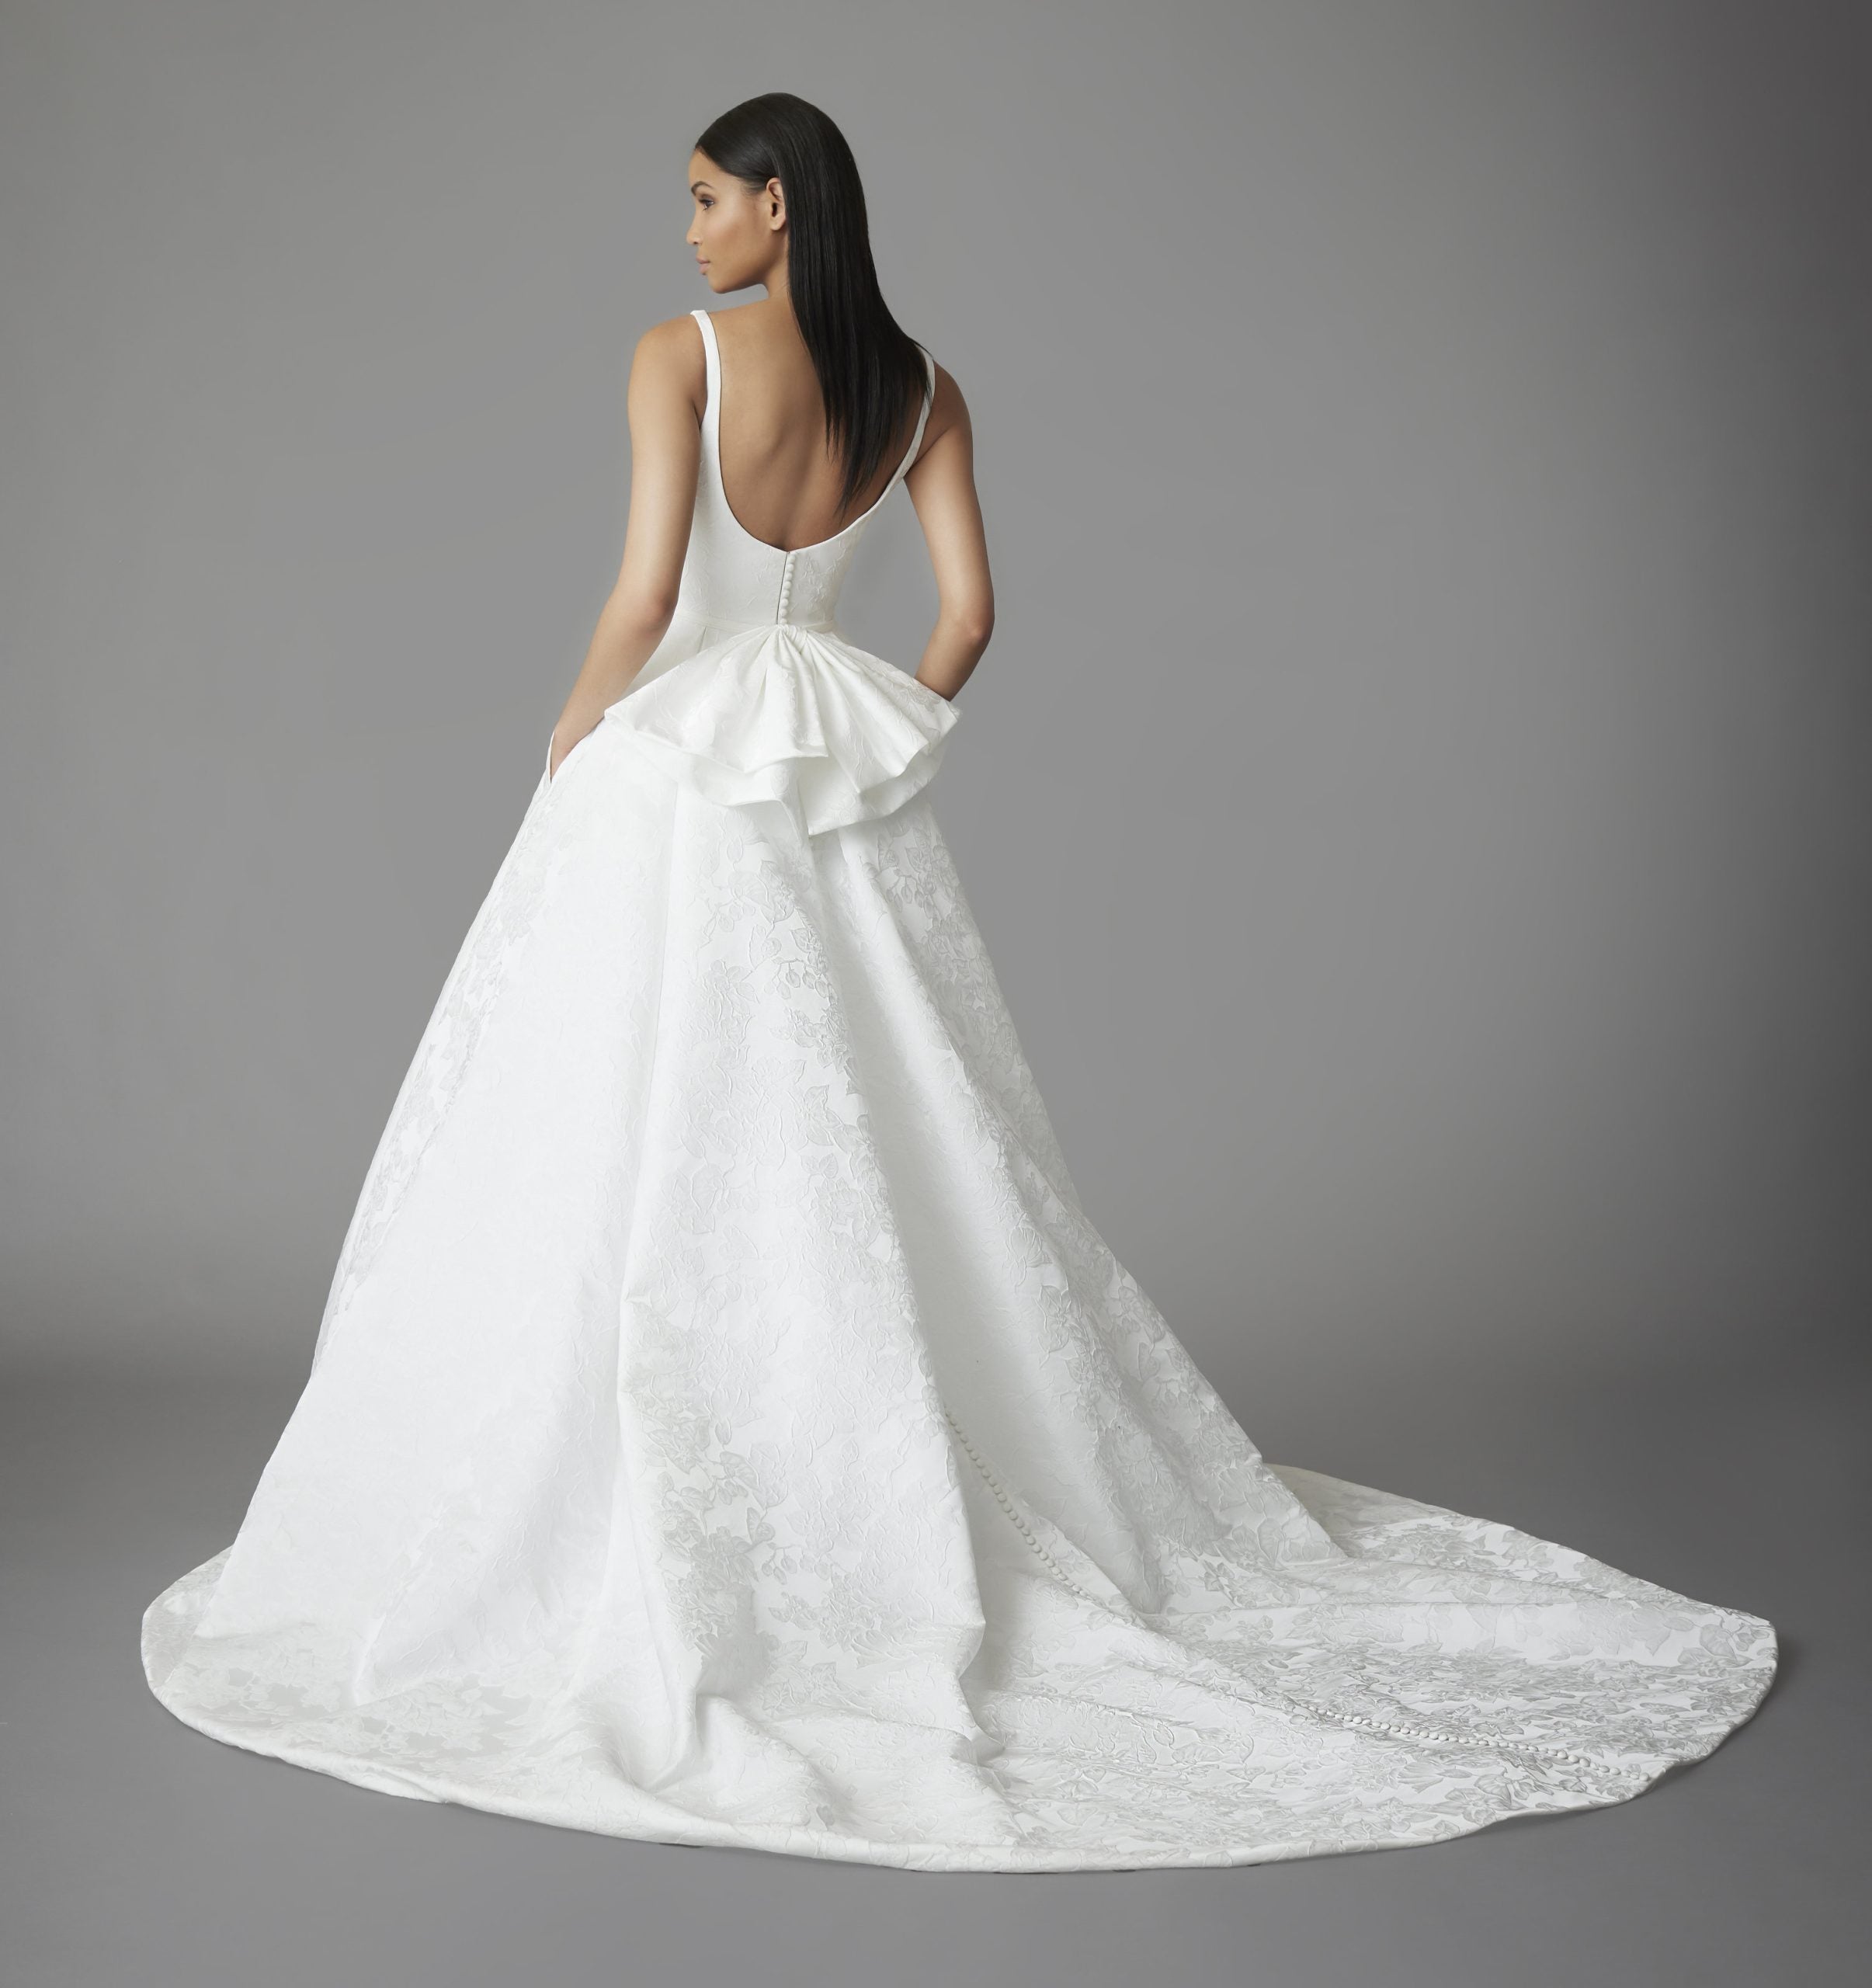 Sleeveless Ball Gown Wedding Dress With Back Bow by Allison Webb - Image 2